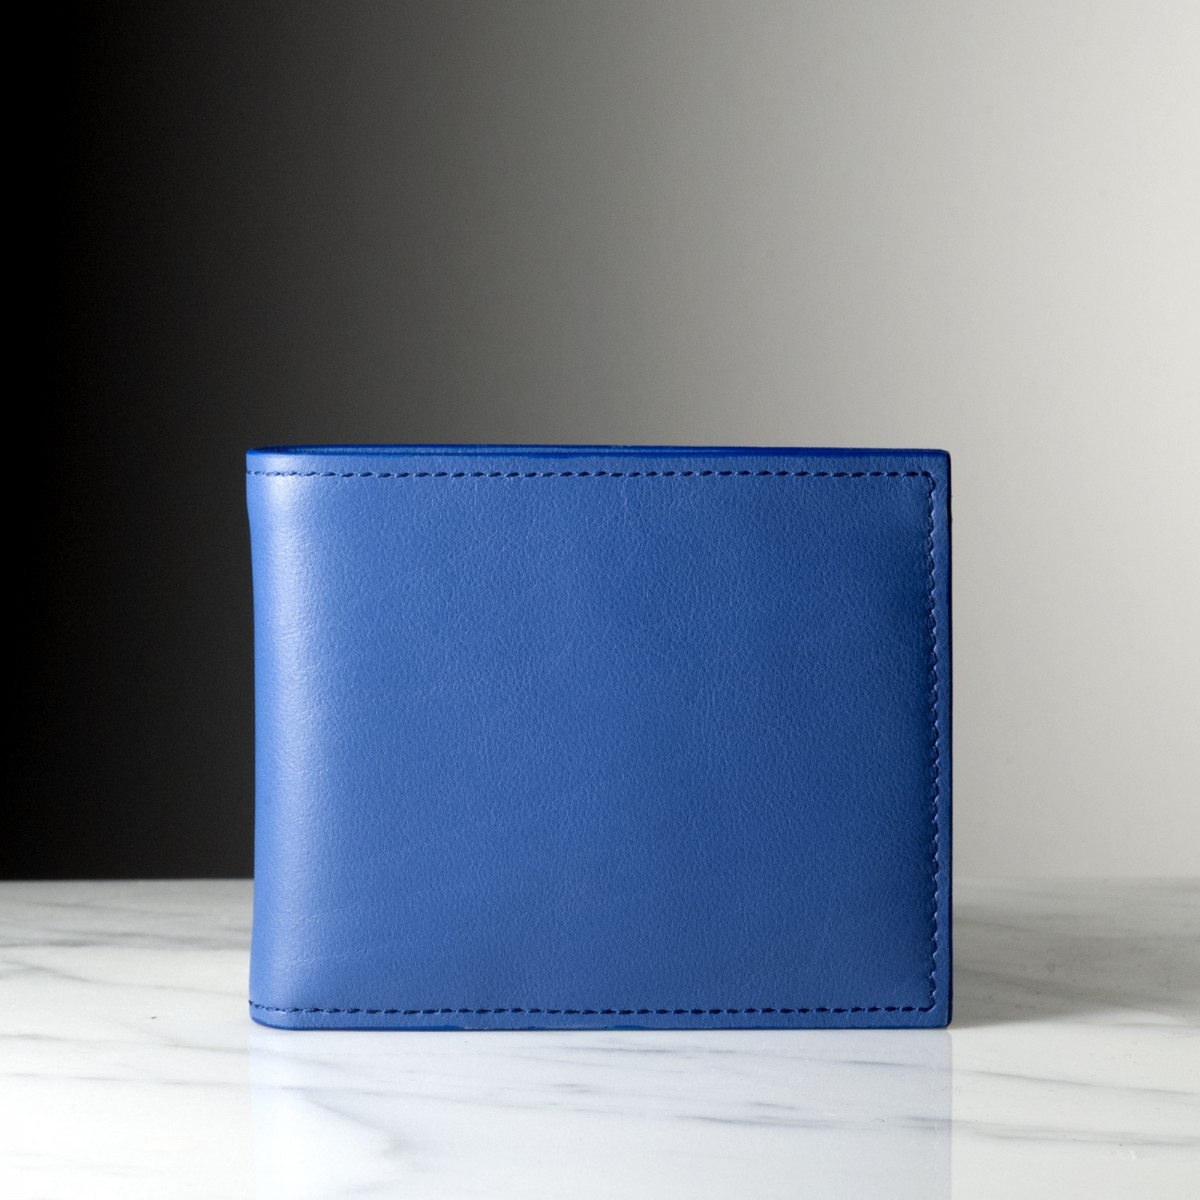 POLO - Calfskin leather wallet, handmade in Italy